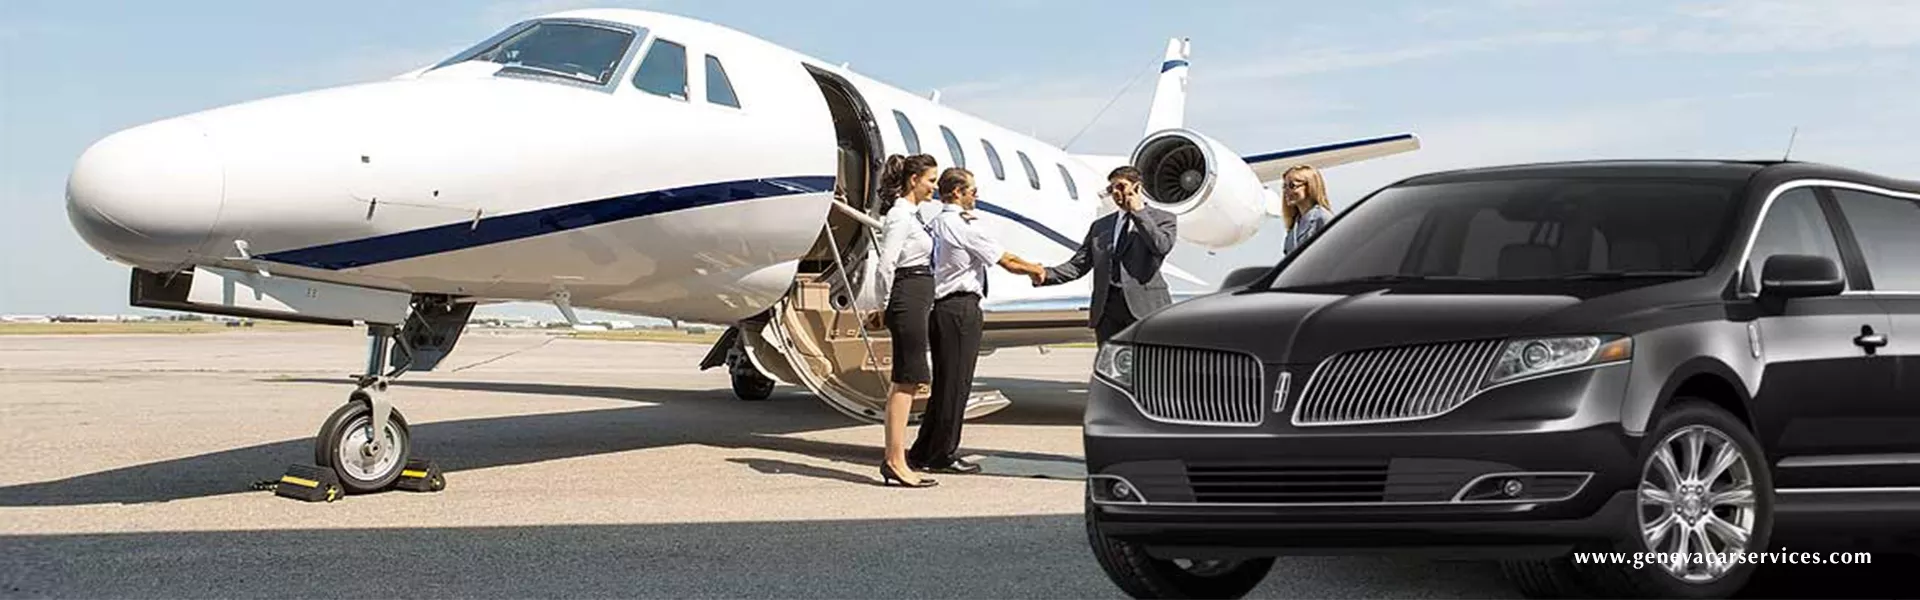 Check out the Advantages Of Utilizing Airport Car Transfer Services